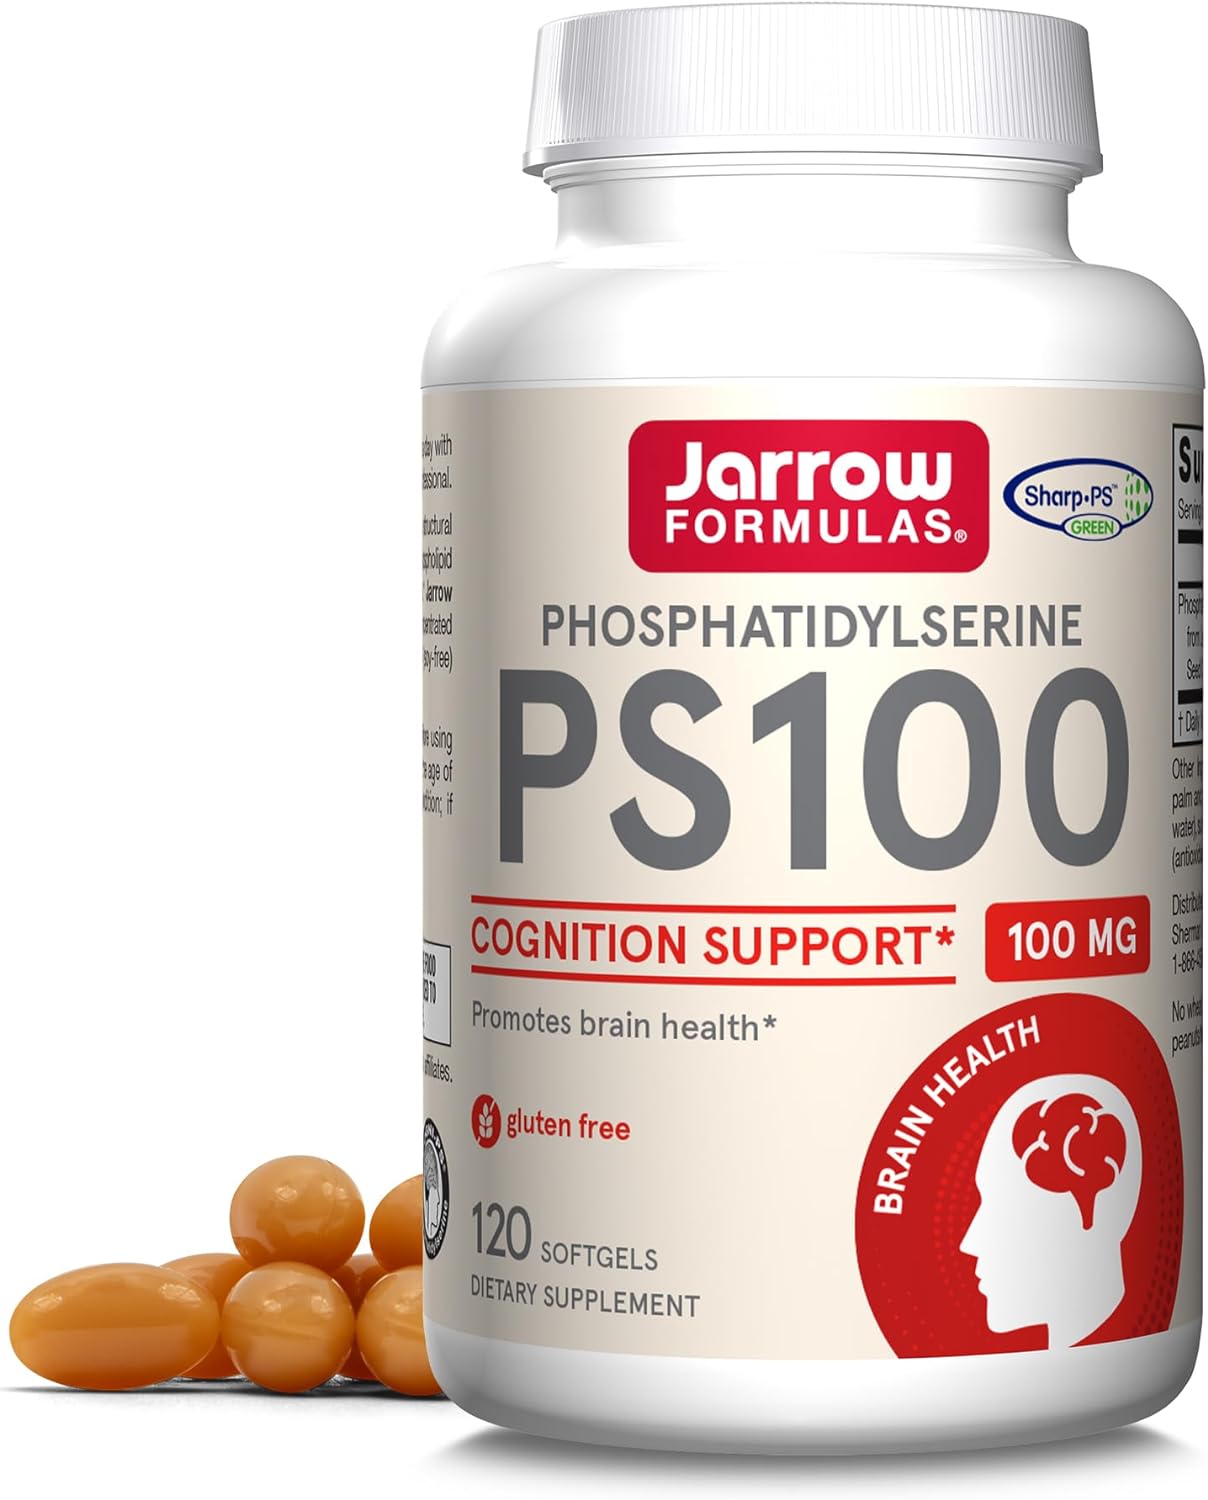 Jarrow Formulas PS100 Phosphatidylserine 100 mg, Dietary Supplement for Brain Health and Cognition S